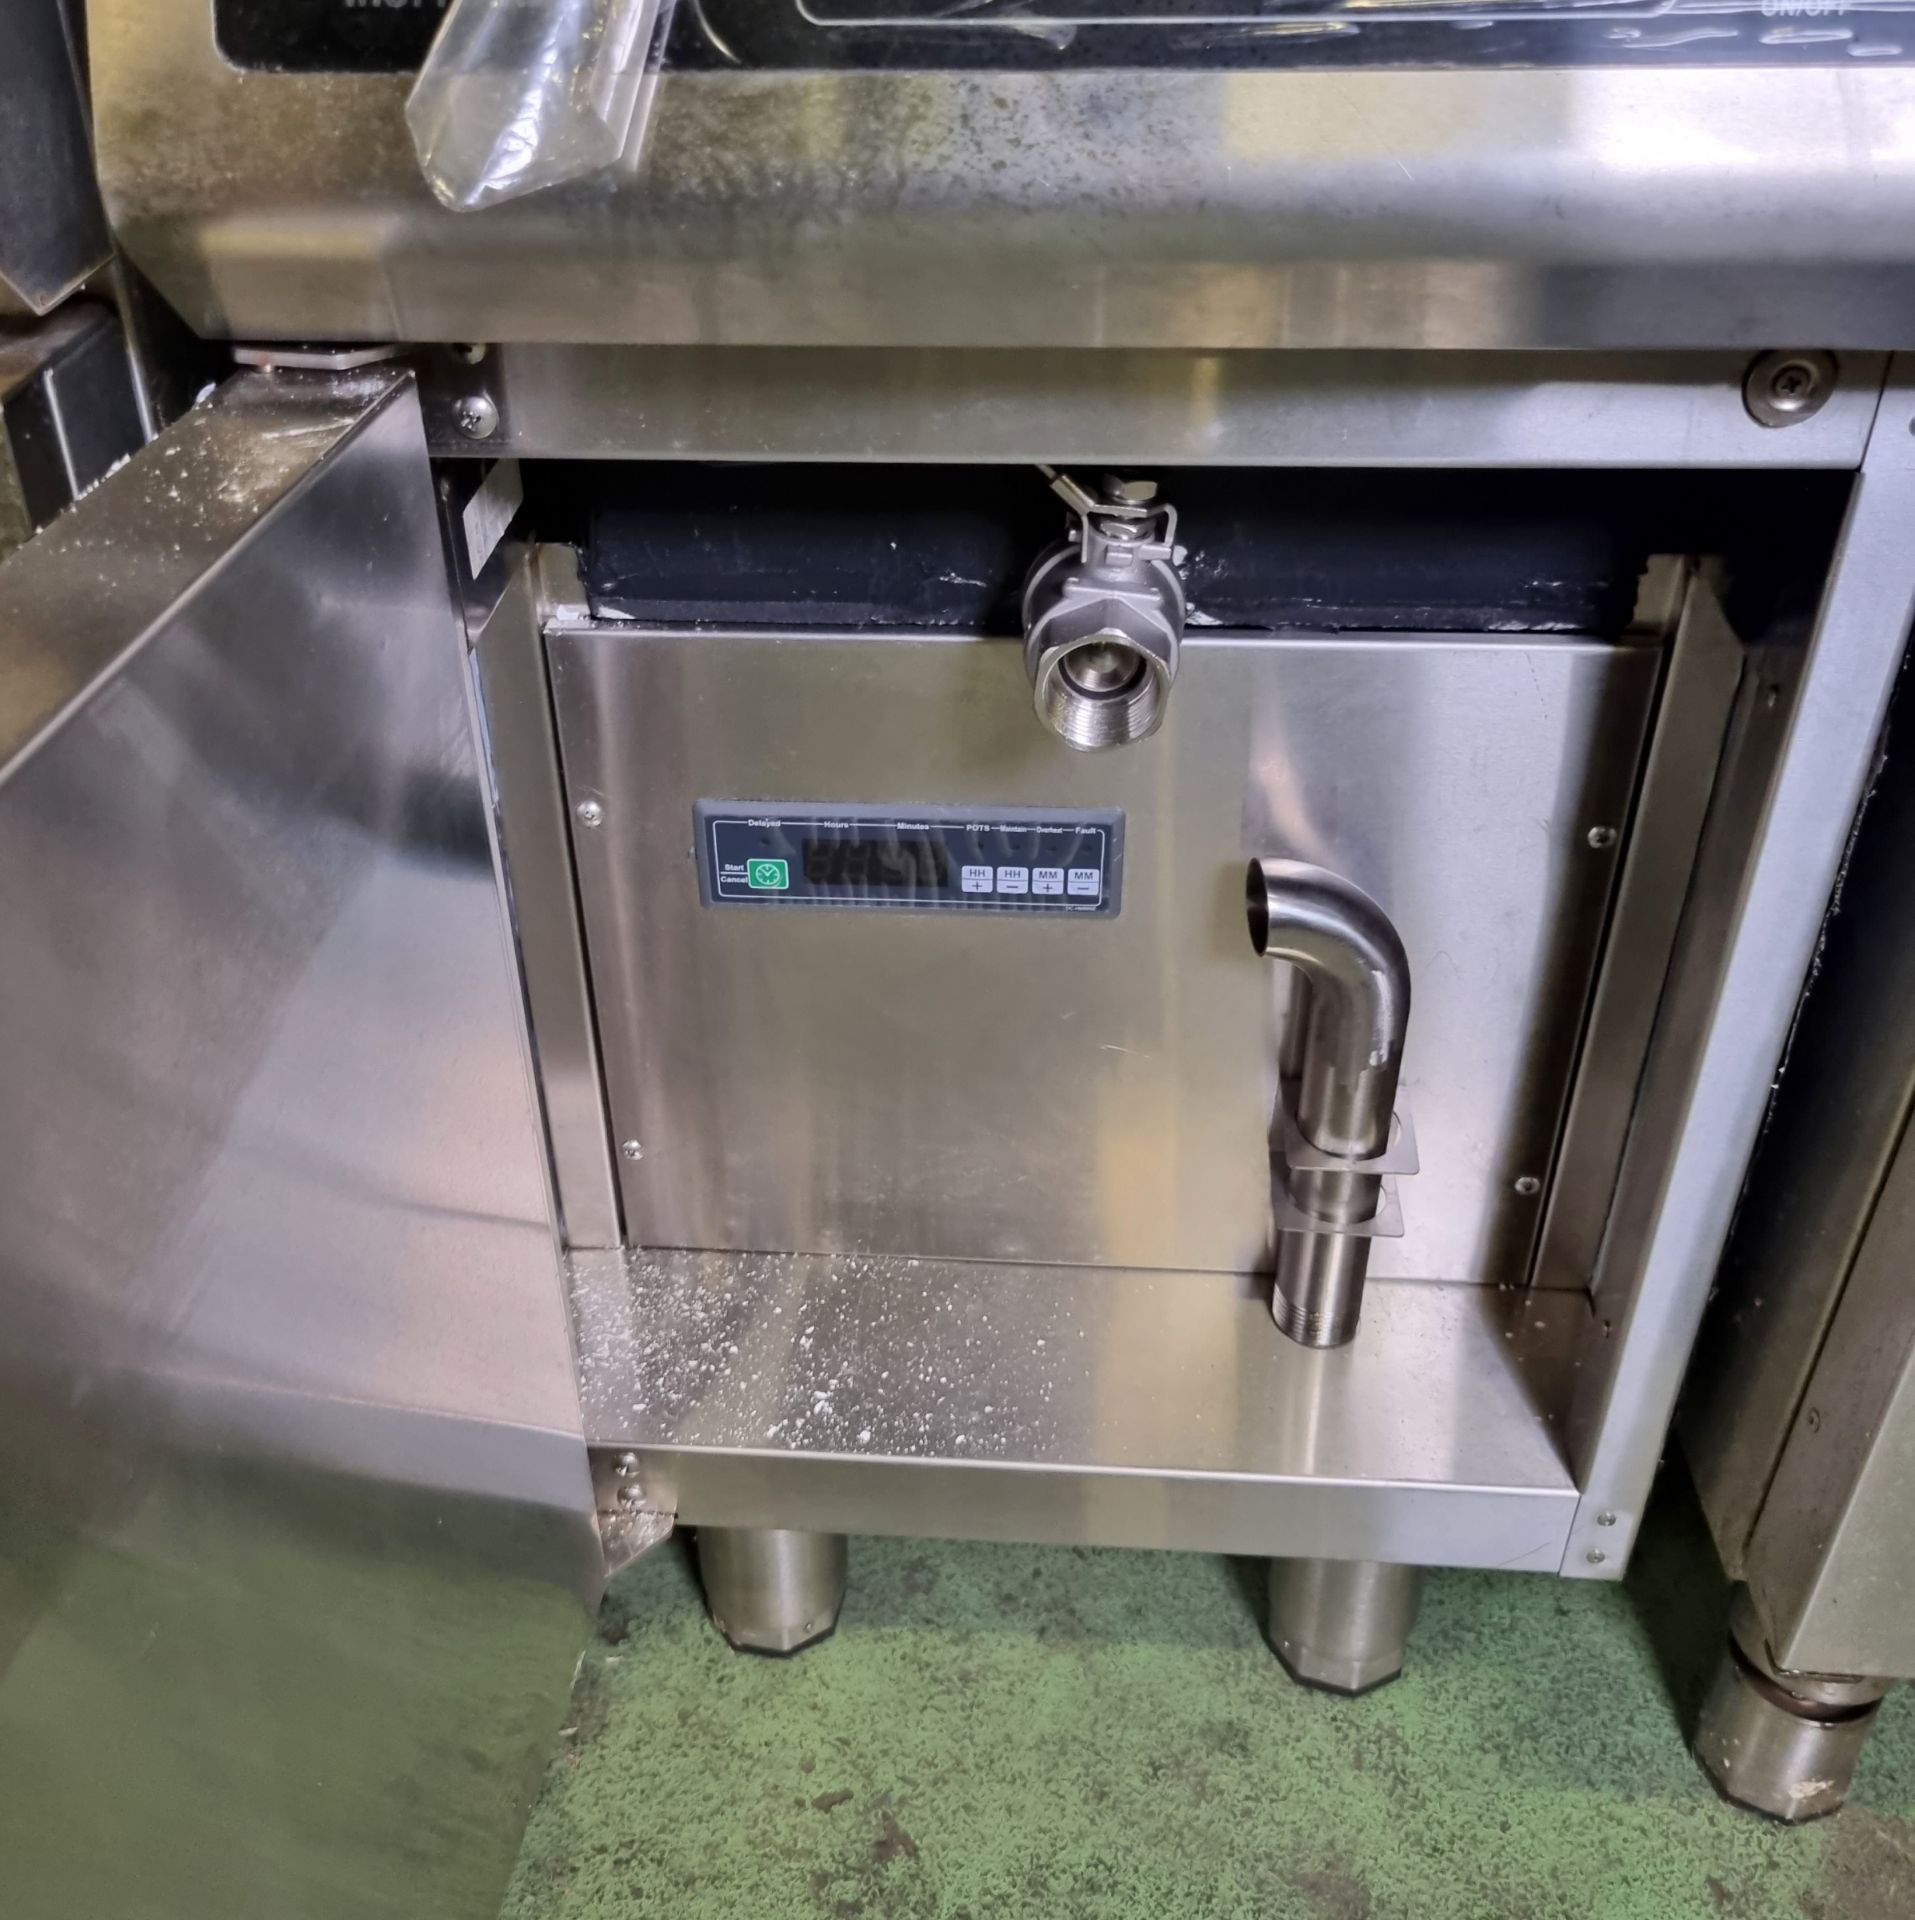 Rexmartins ESC-4B-08 free standing electric induction fryer - single tank with basket - Image 4 of 4